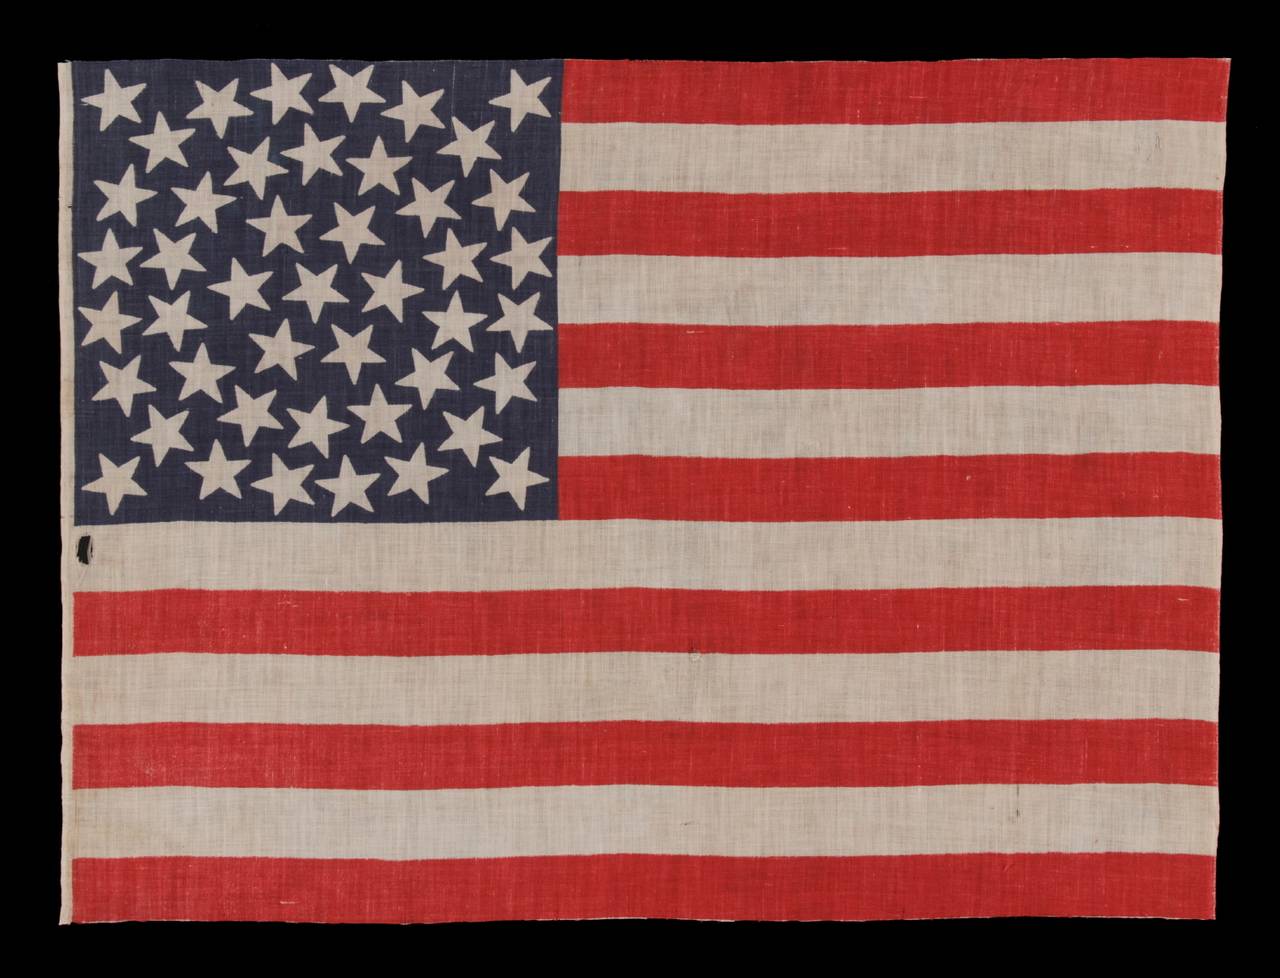 45 stars in a medallion configuration, a rare feature in this period, 1896-1908, Utah statehood:

45 stars American parade flag, printed on cotton bunting, with a beautiful, triple-wreath style medallion configuration of stars. This highly desired